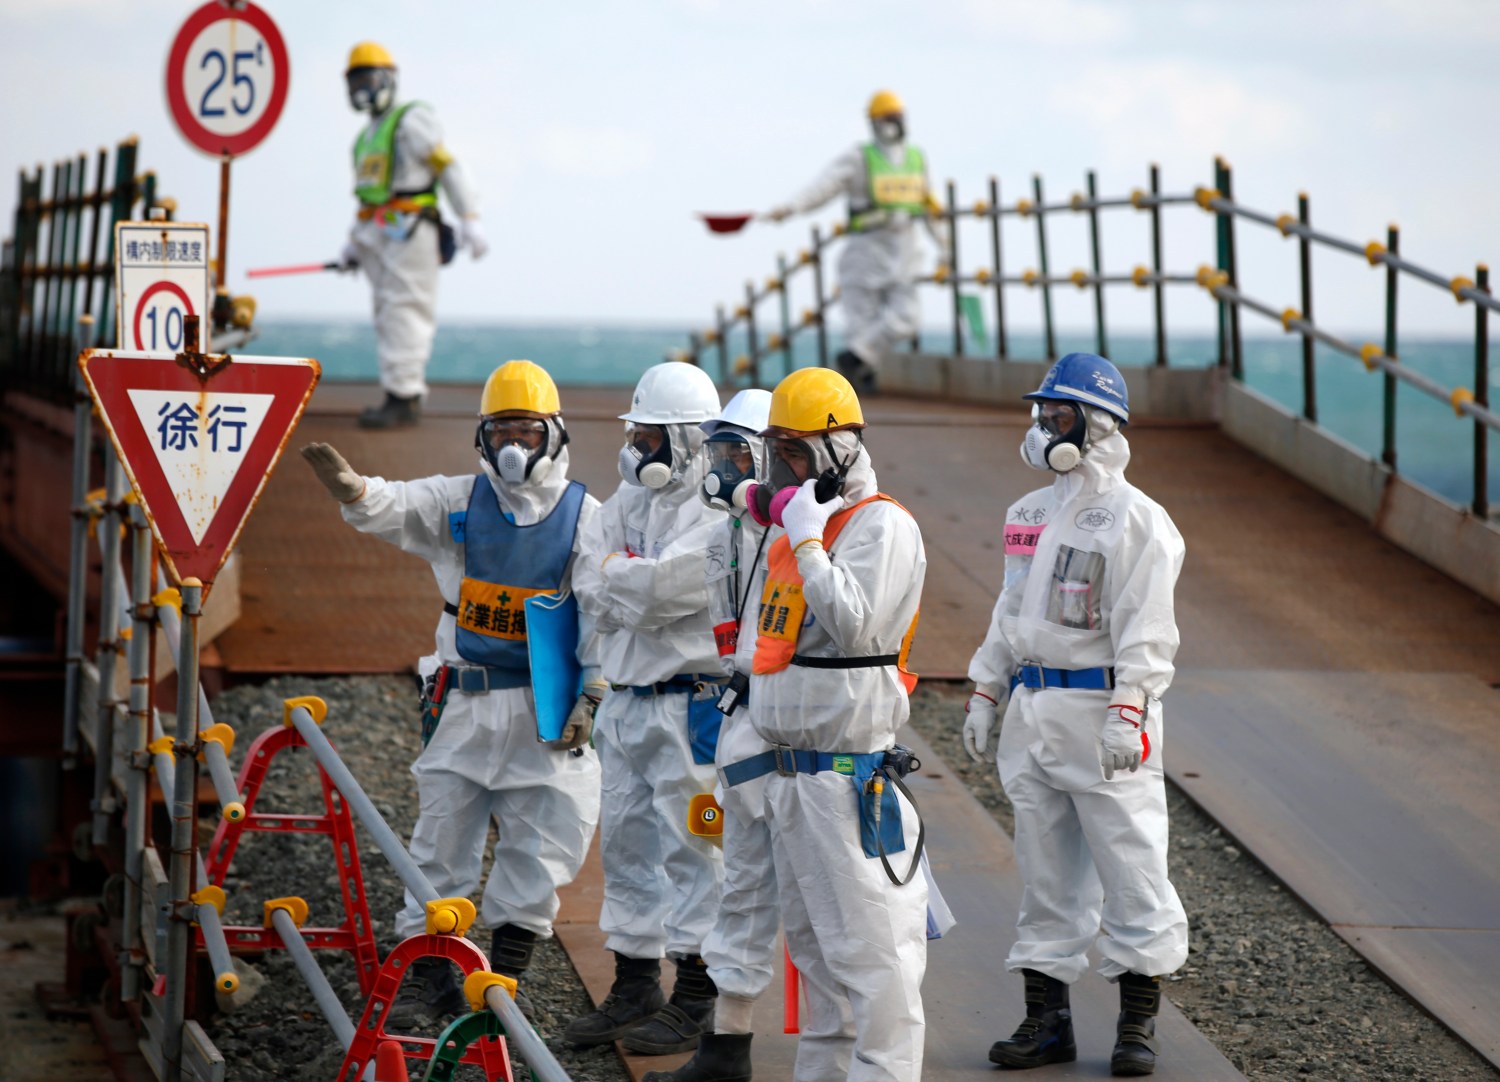 Workers, wearing protective suits and masks, are seen near the No. 3 and No.4 reactor buildings at Tokyo Electric Power Co's (TEPCO) tsunami-crippled Fukushima Daiichi nuclear power plant in Okuma town, Fukushima prefecture, Japan February 10, 2016. REUTERS/Toru Hanai - RTX26AMM